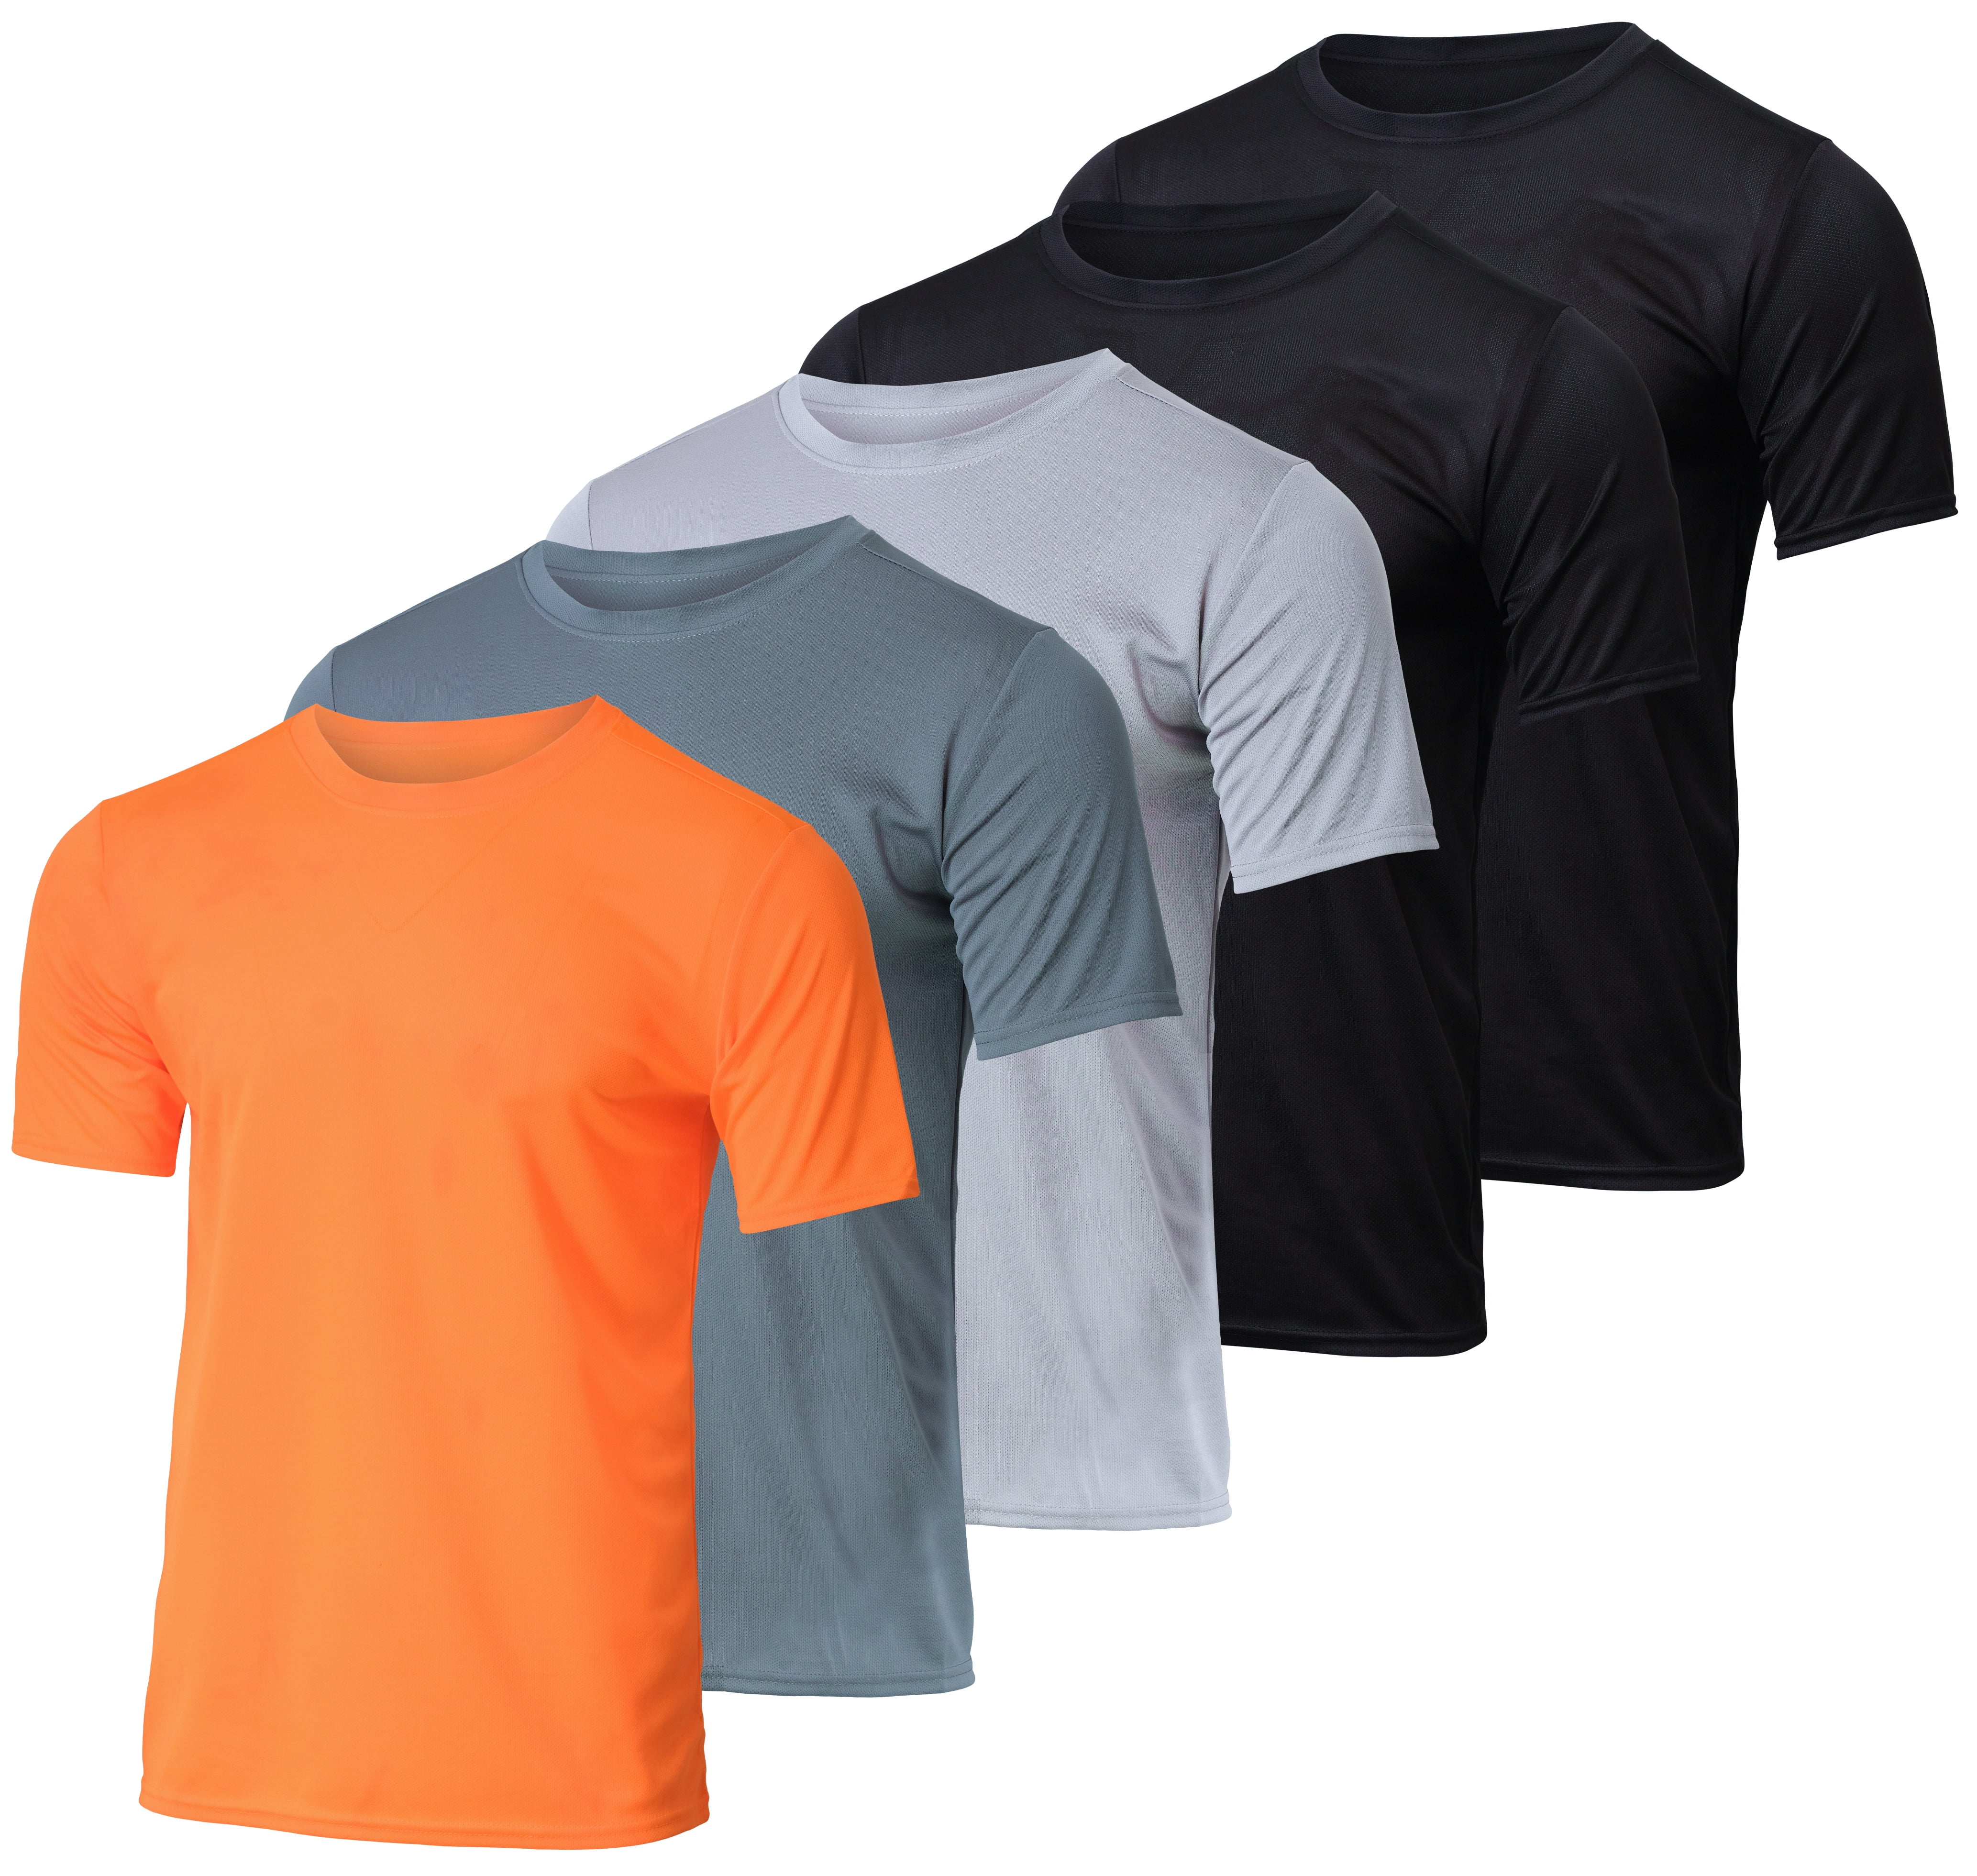 ACTIVE-DRY Plain Cotton Touch Breathable Polyester Sports Tee T-Shirt  Tshirt